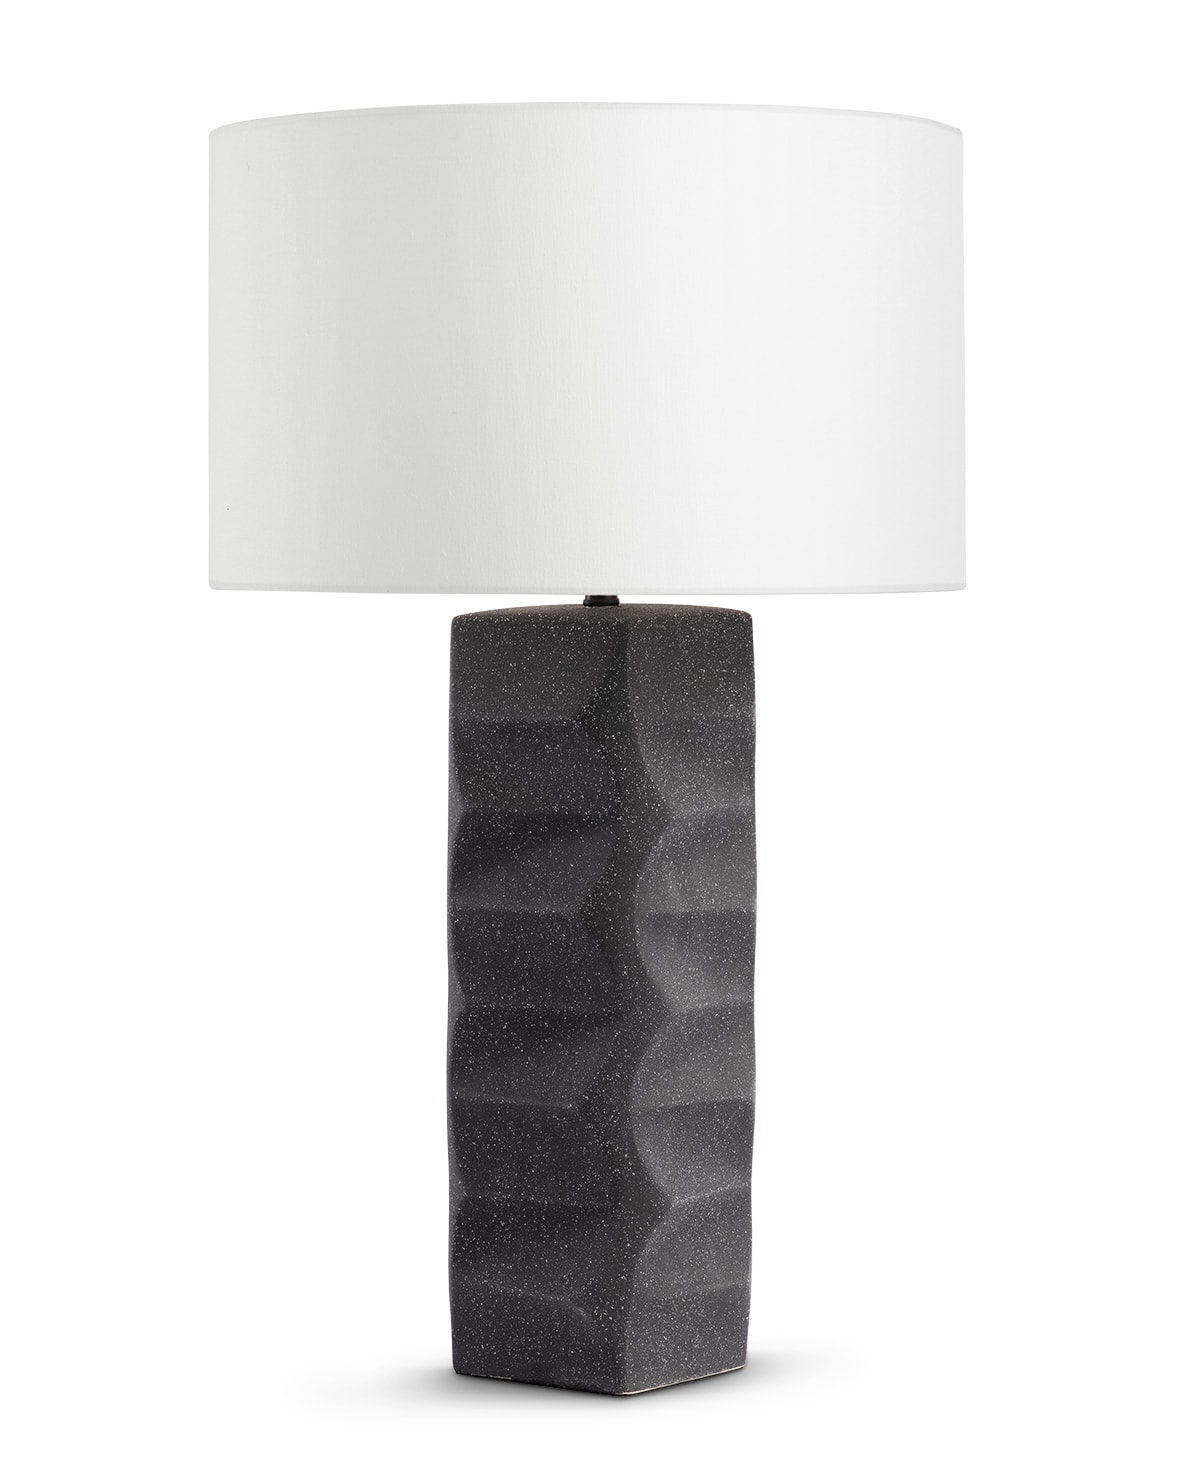 FlowDecor Bond Table Lamp in ceramic with charcoal textured finish and off-white linen drum shade (# 4610)